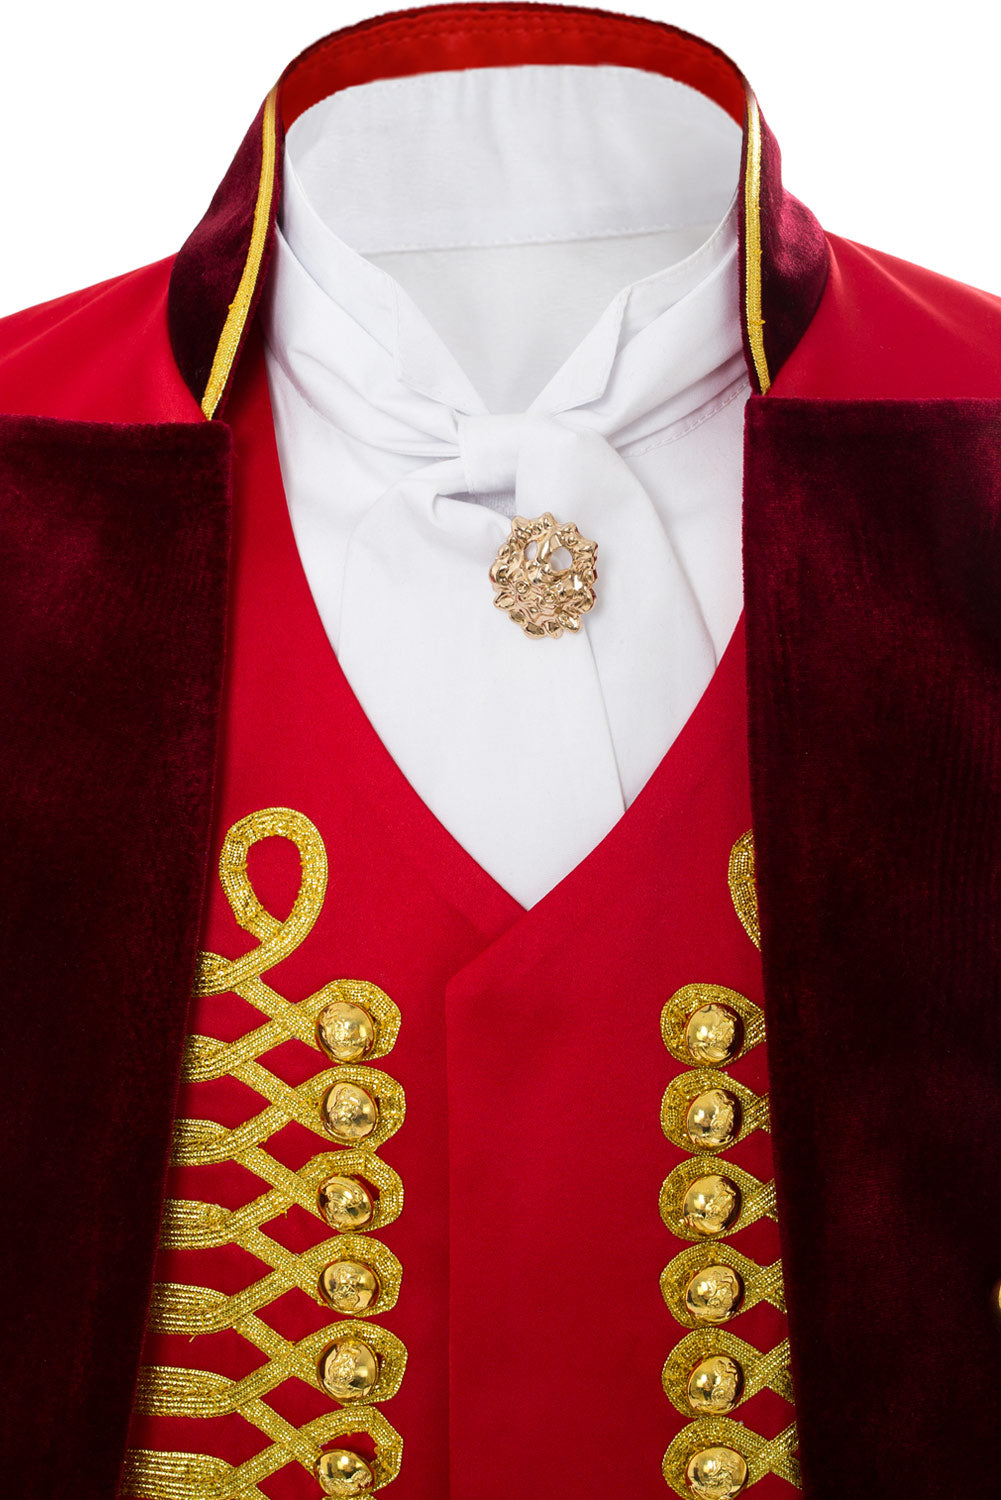 The Greatest Showman P.T. Barnum Cosplay Costume Ver. 2